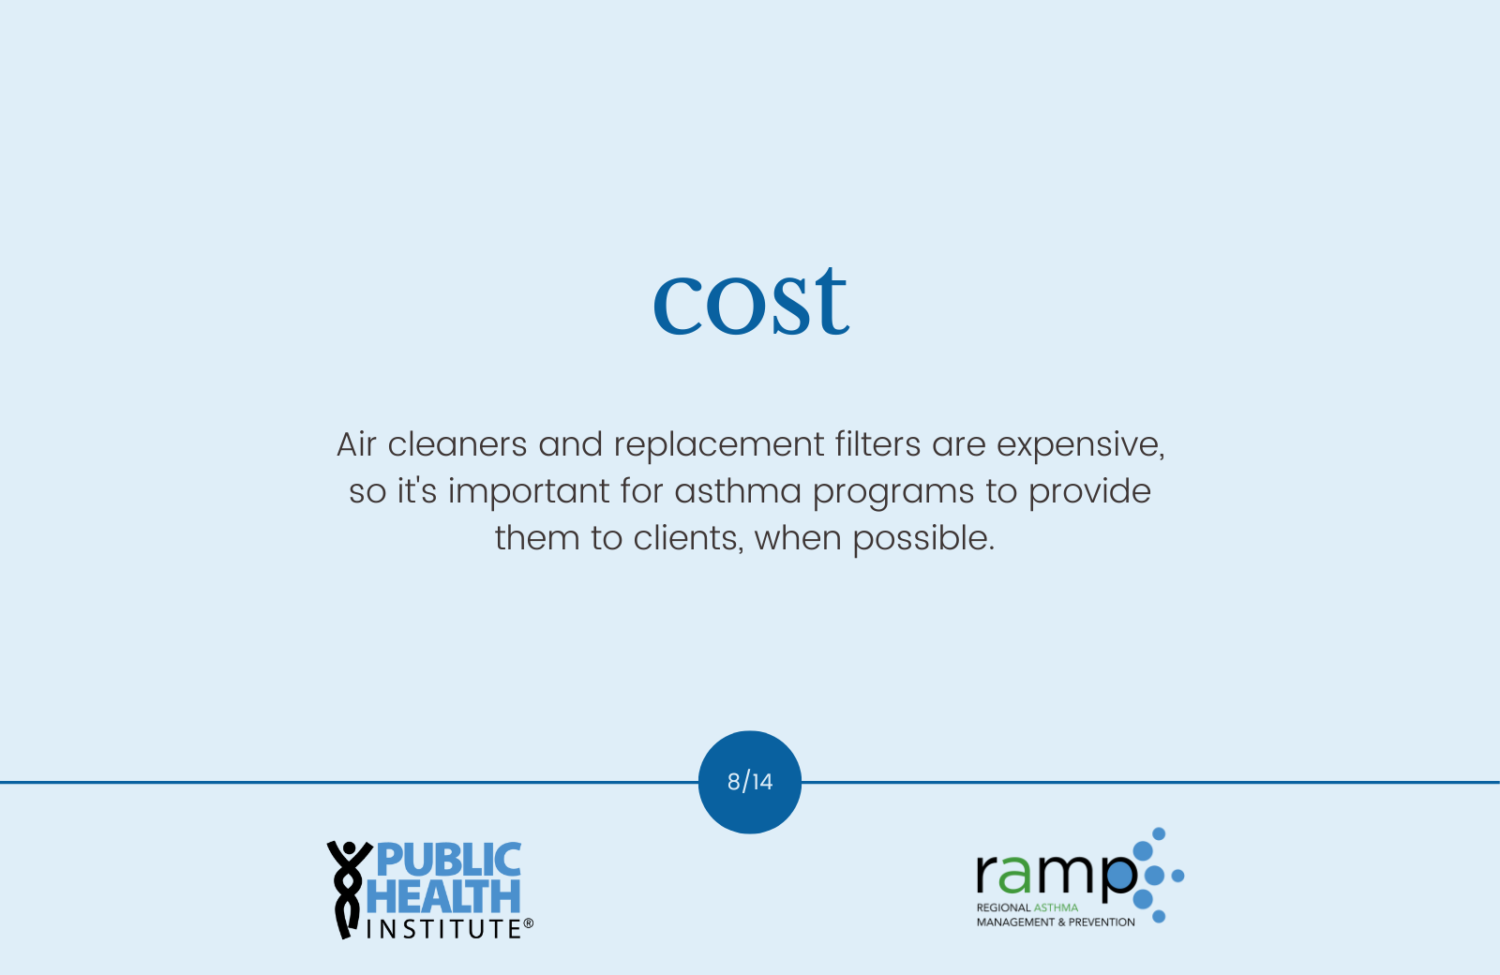 Air cleaners and replacement filters are expensive, so it's important for asthma programs to provide them to clients, when possible.